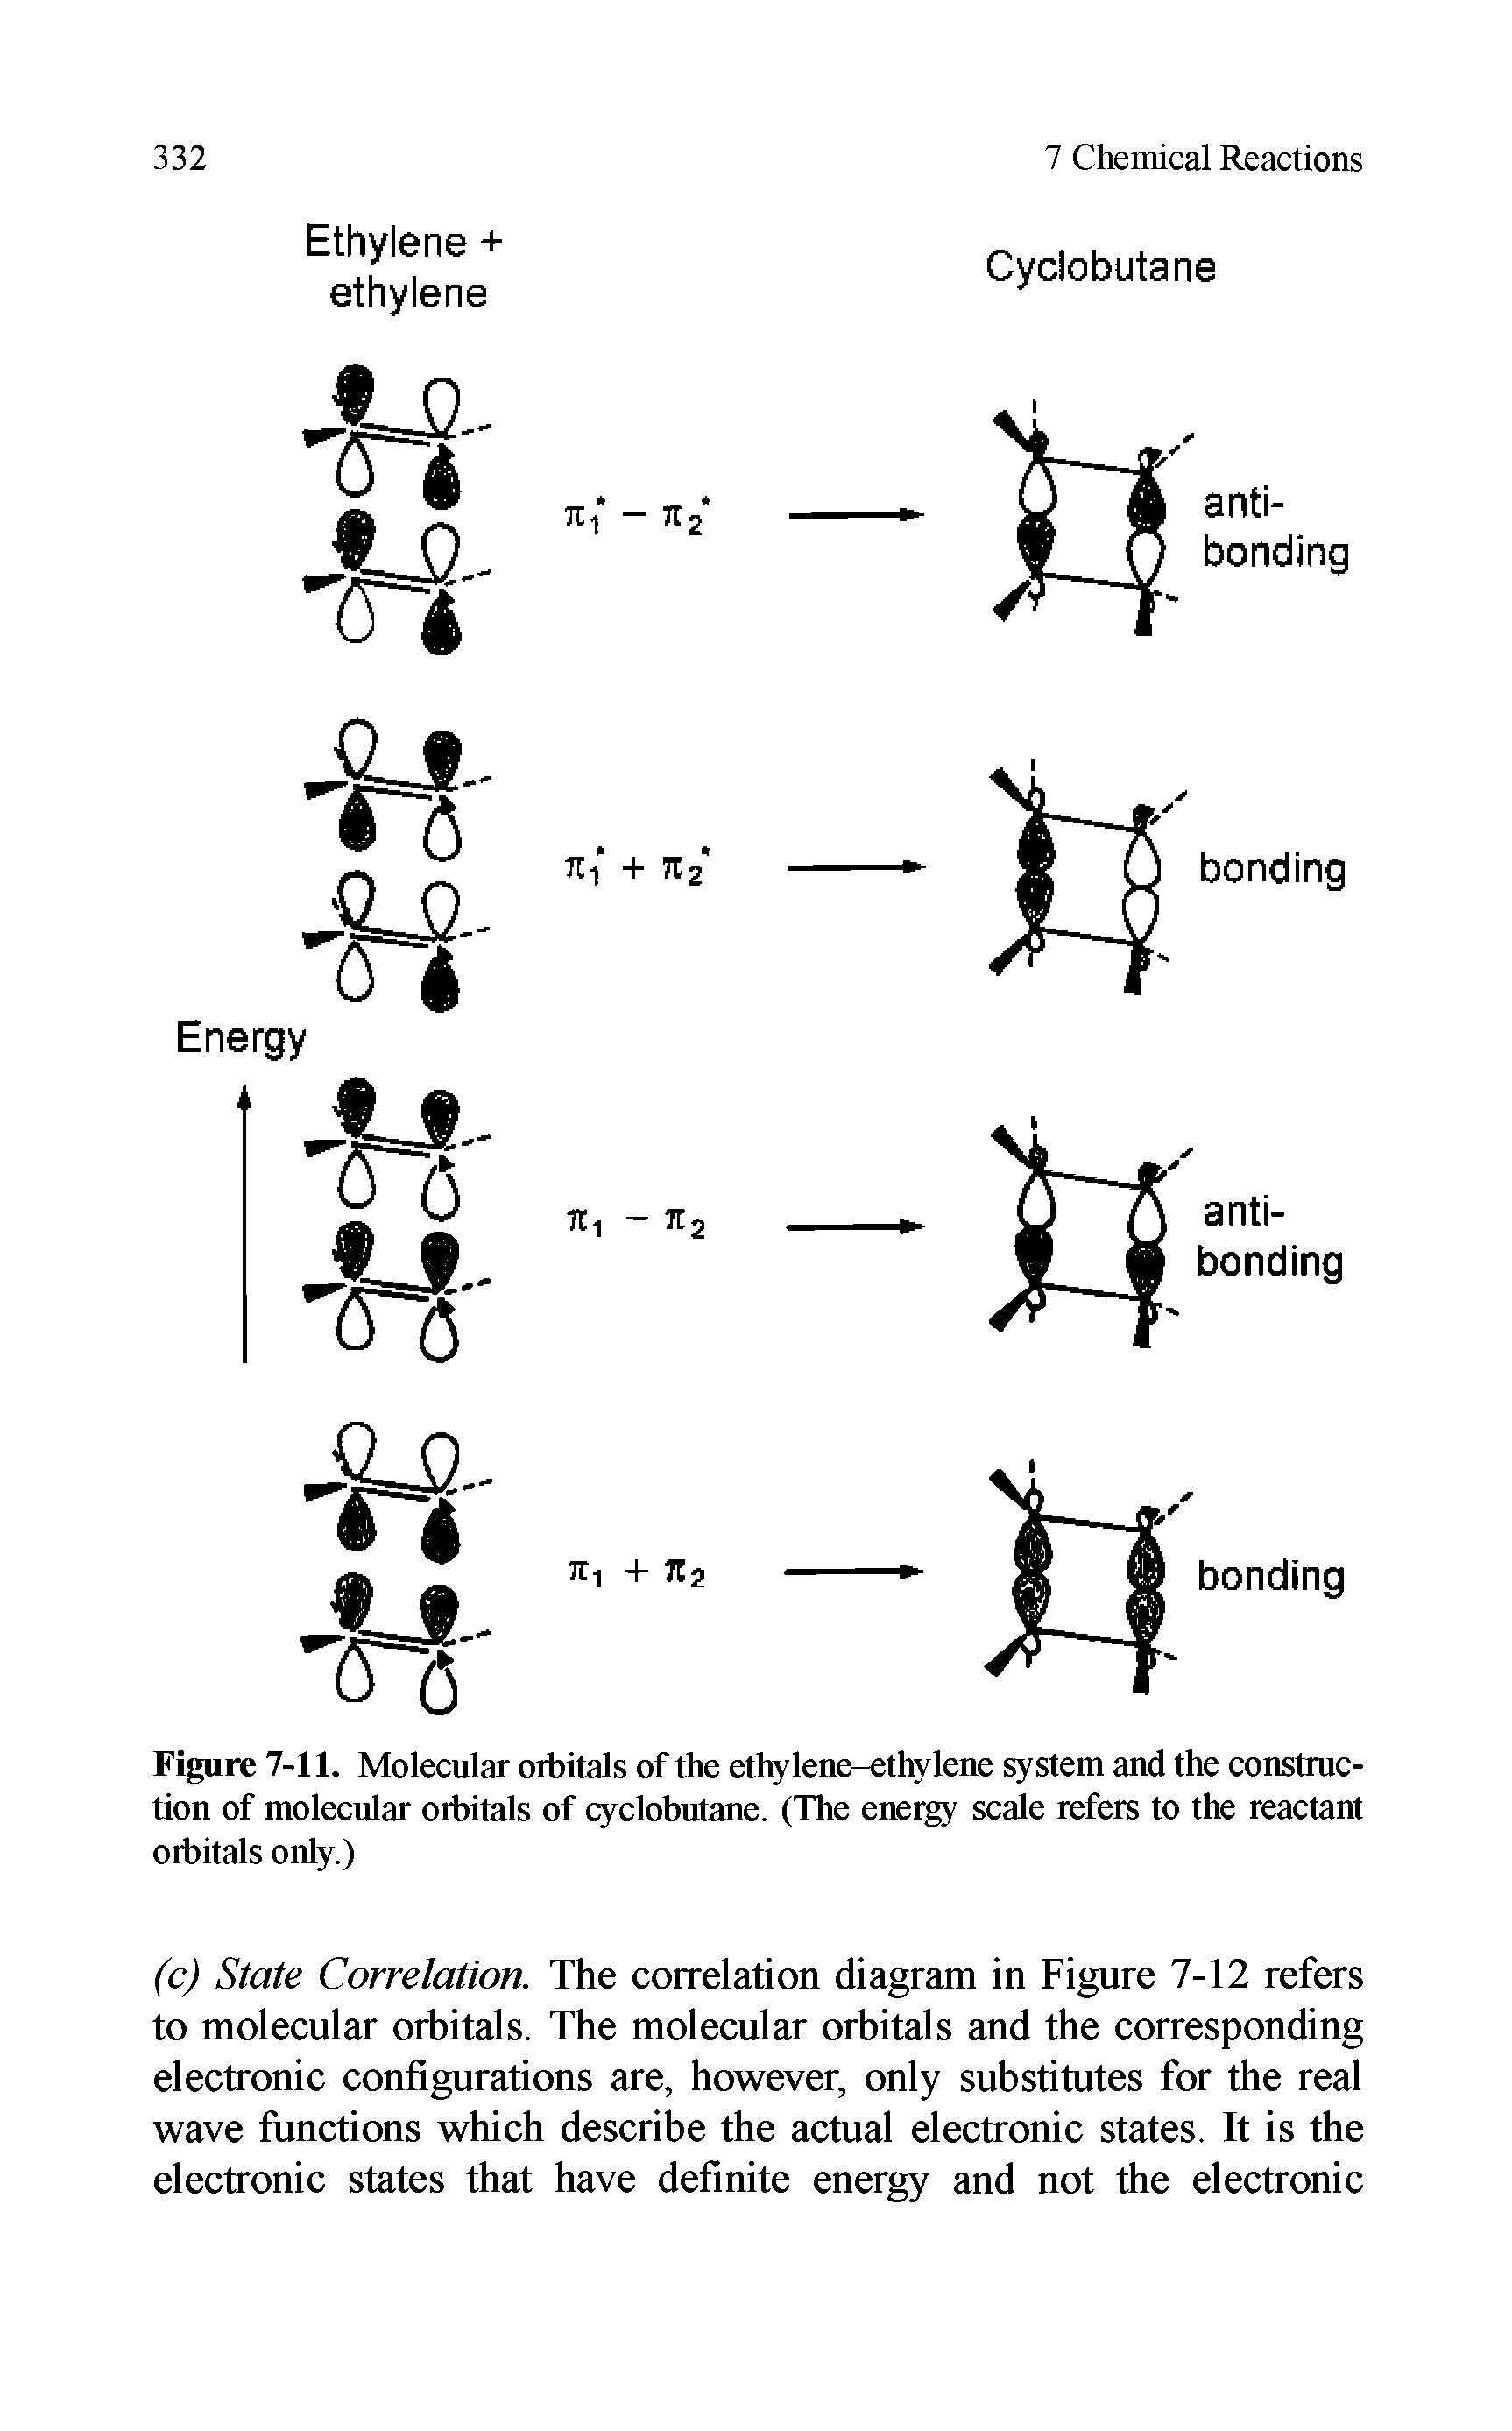 Figure 7-11. Molecular orbitals of the ethylene-ethylene system and the construction of molecular orbitals of cyclobutane. (The energy scale refers to the reactant orbitals only.)...